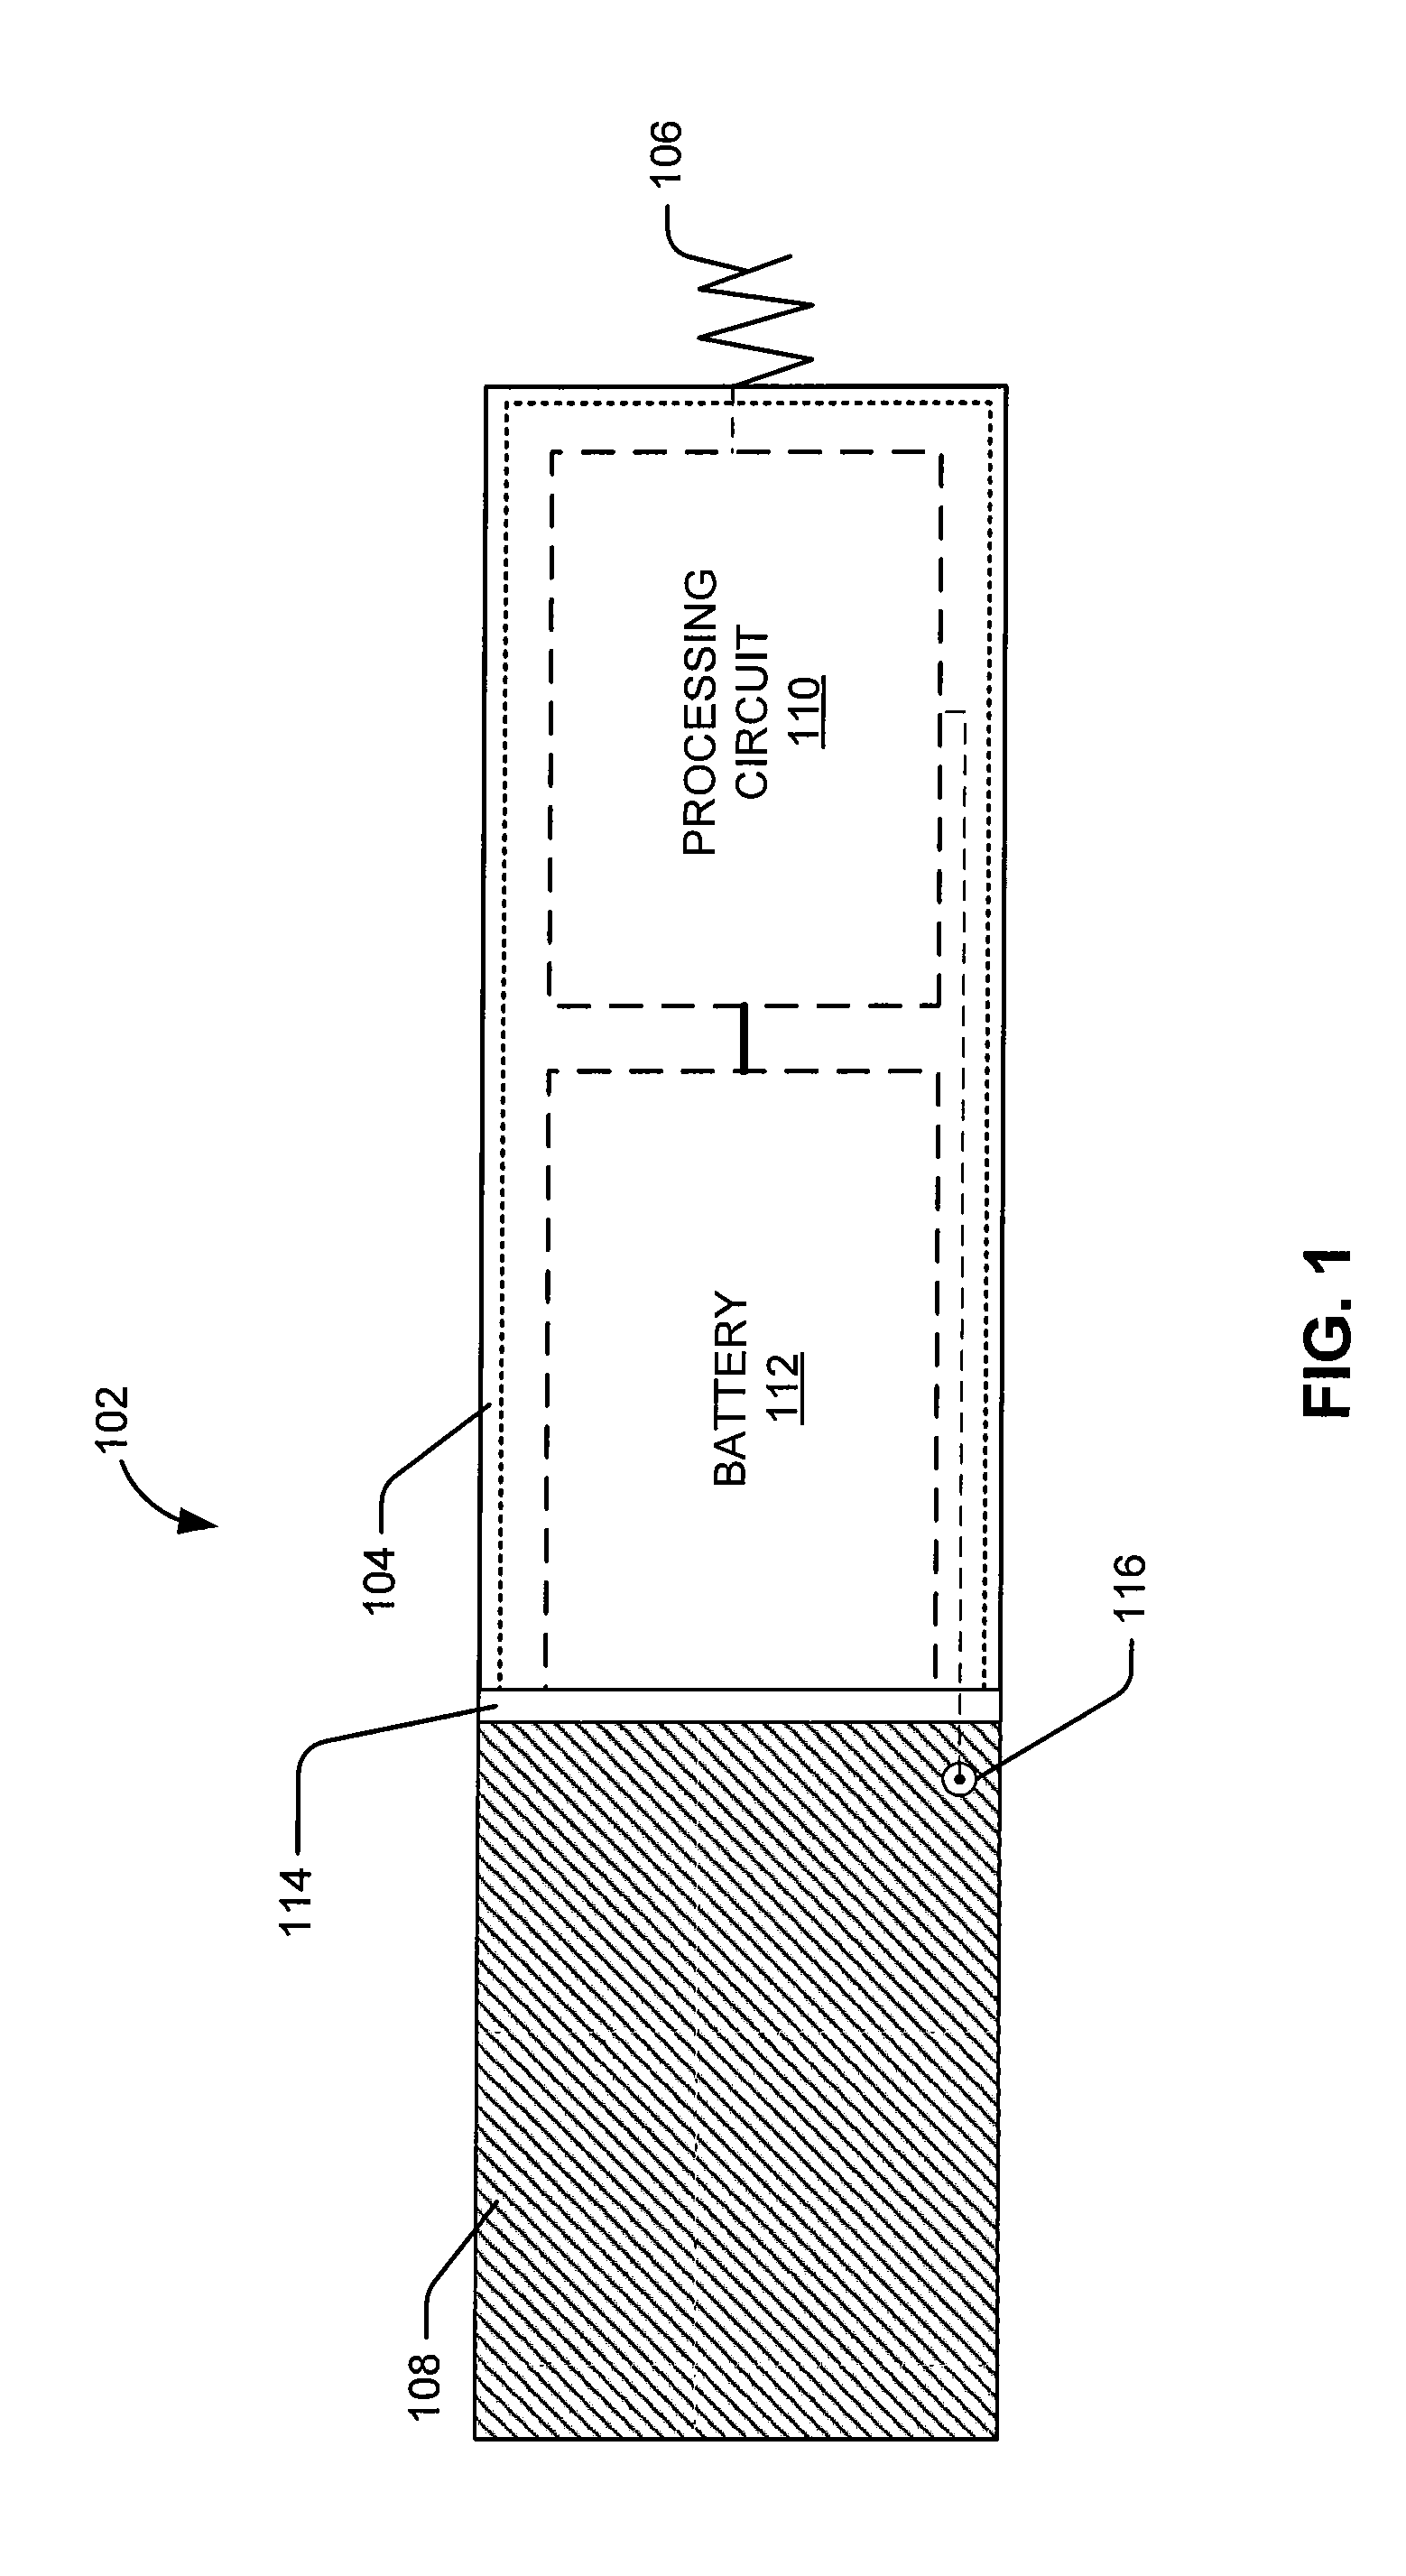 Leadless intra-cardiac medical device with dual chamber sensing through electrical and/or mechanical sensing